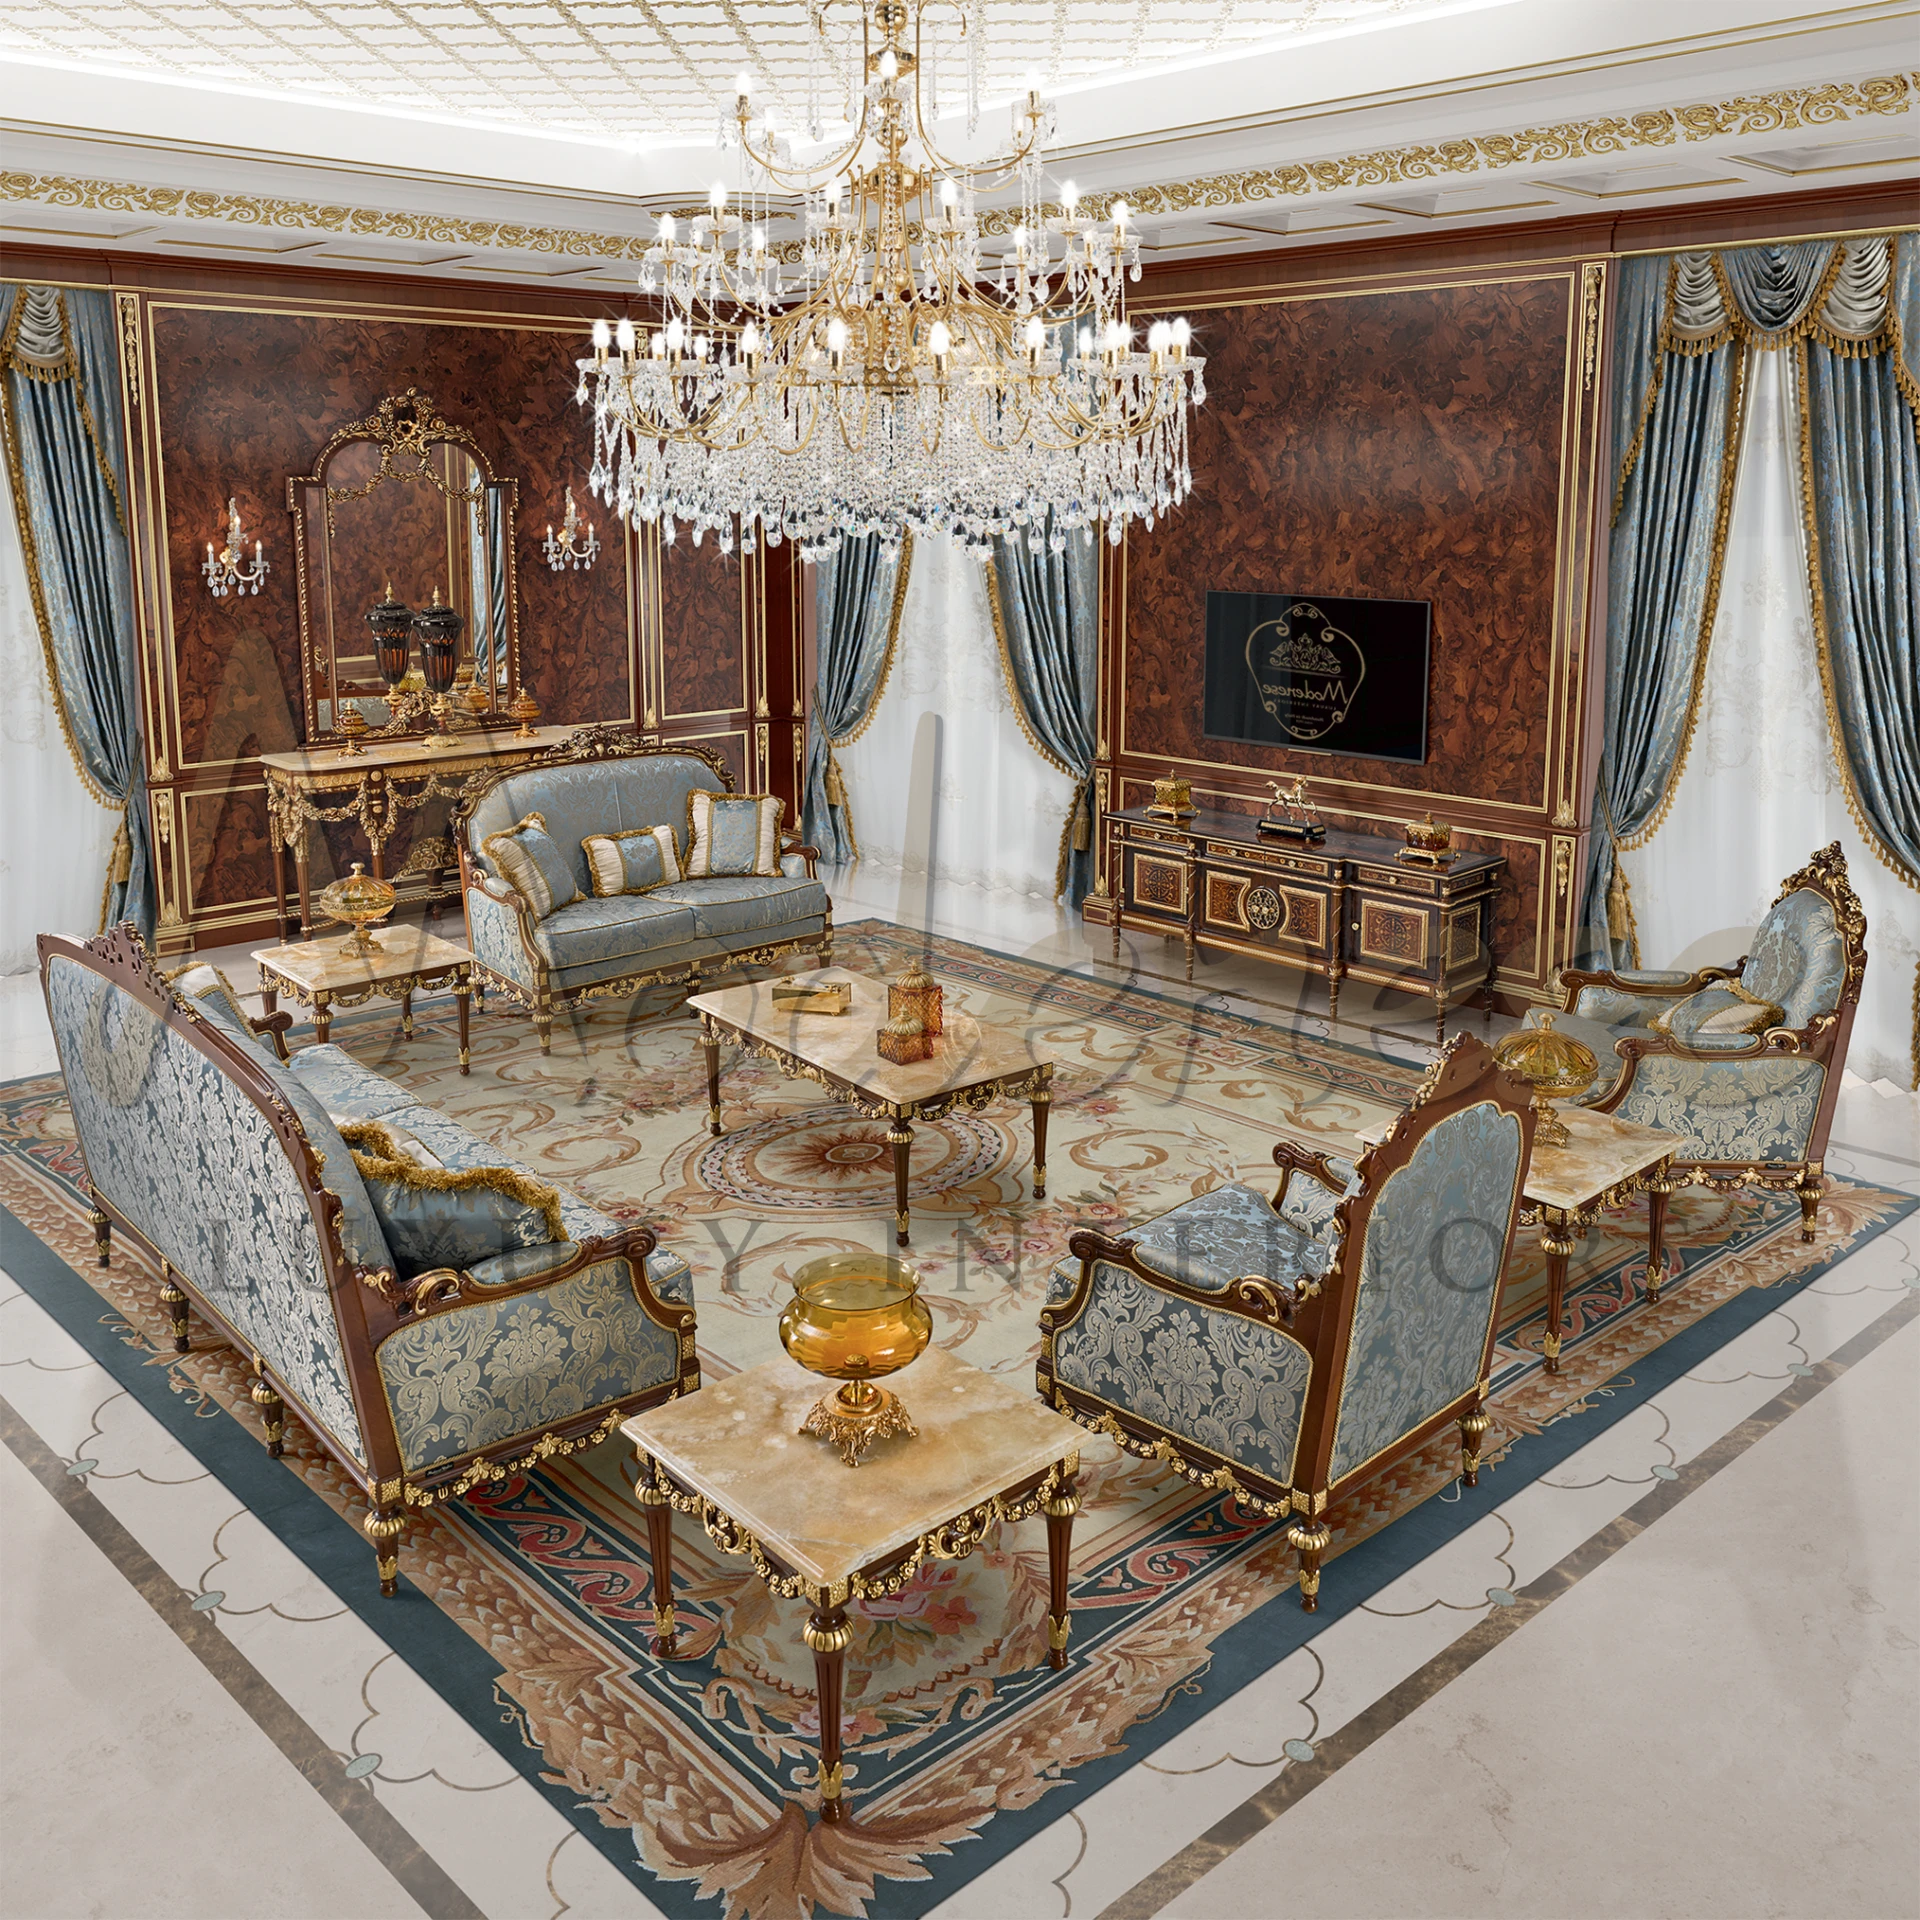 Italian-designed luxury coffee table, perfect for royal interiors.